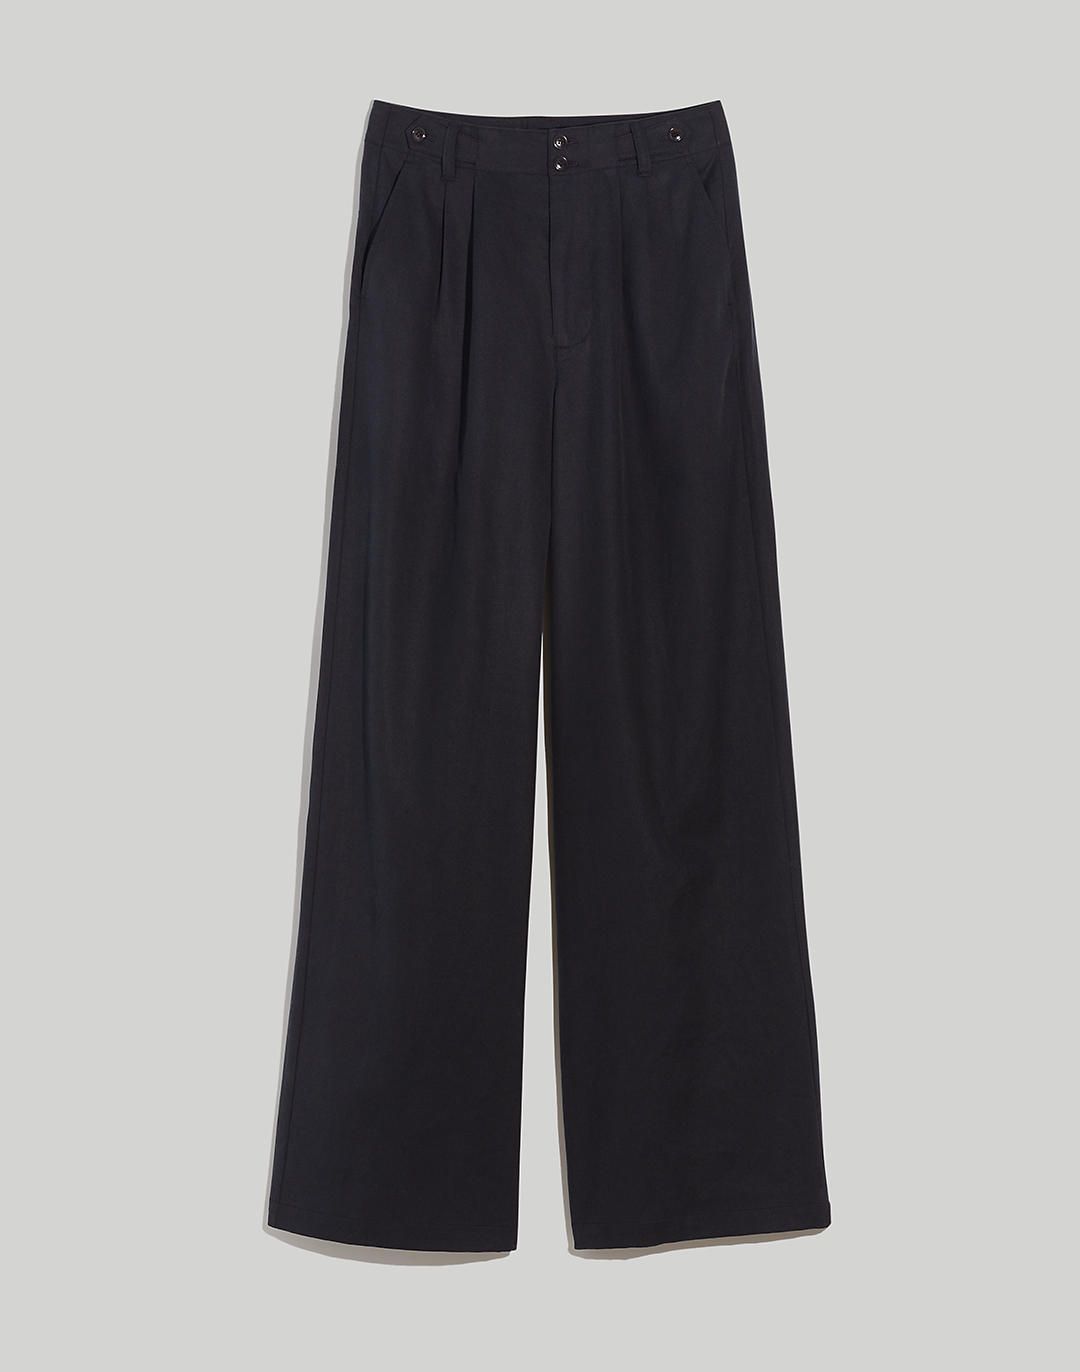 The Plus Harlow Wide-Leg Pant in Linen-Blend | Madewell